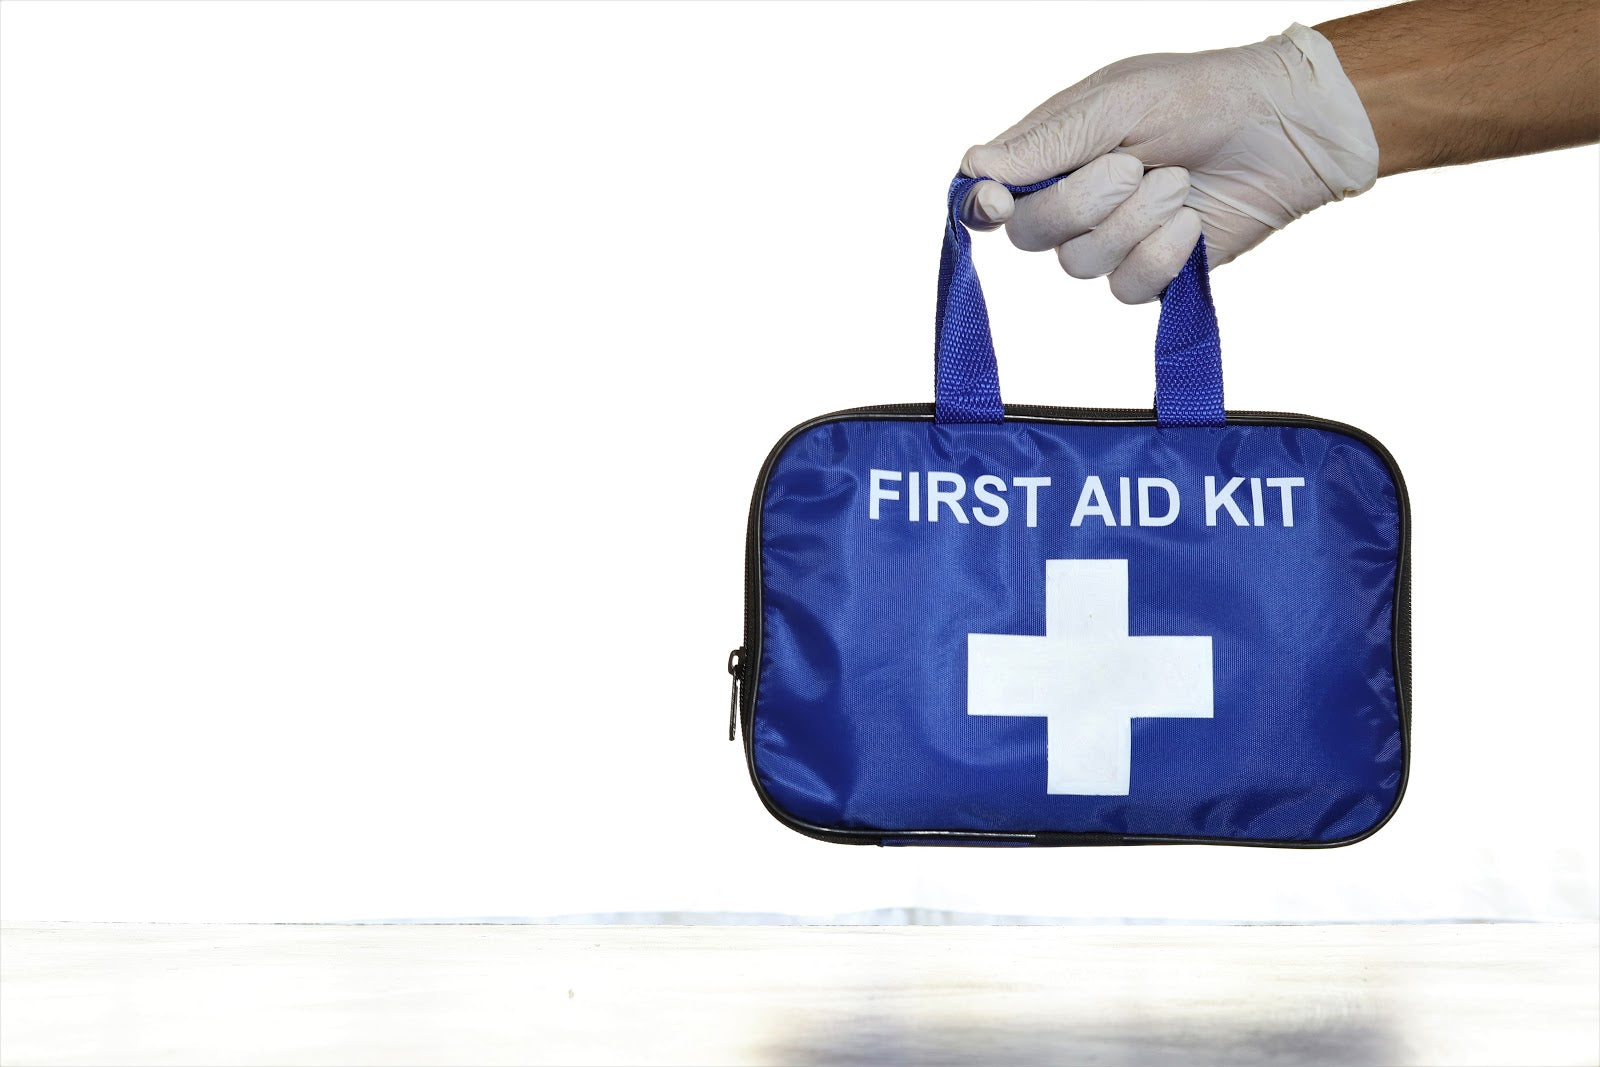 First Aid Kits: What Should Be In Them?